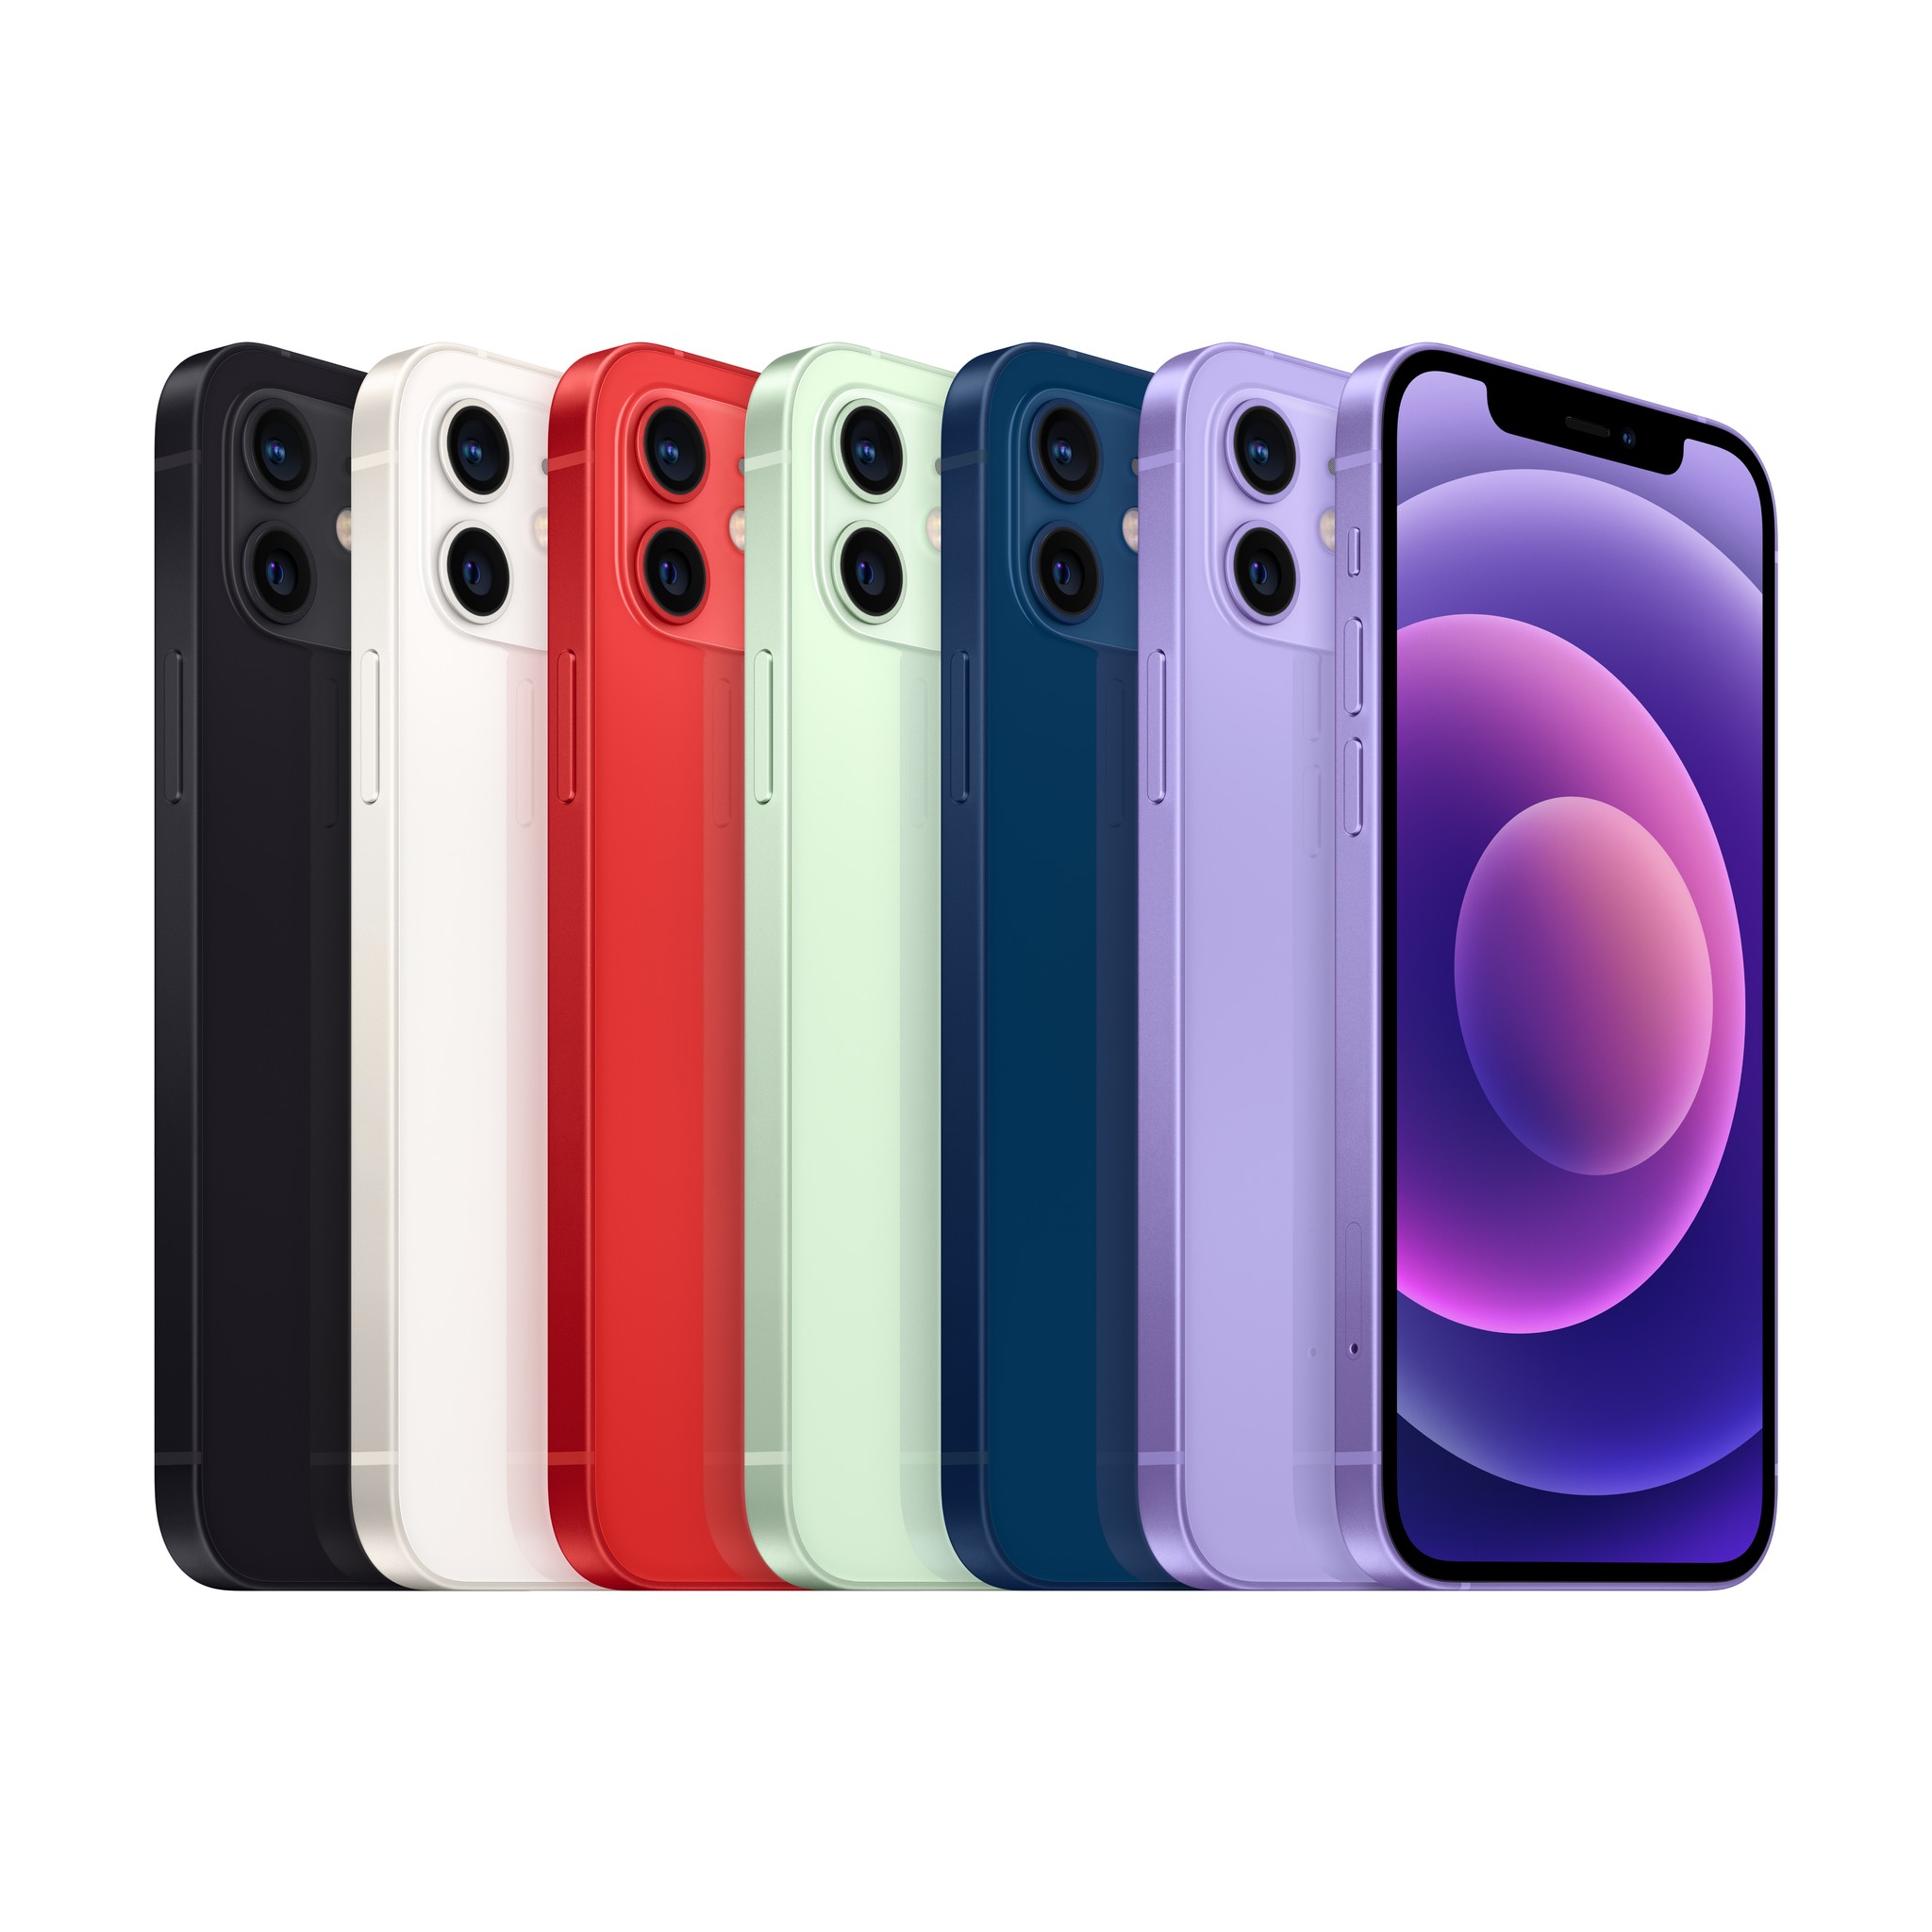 iPhone 12 256GB (Black White Product Red Green Purple Blue) RSG  Solutions Pvt. Ltd., offering Color and Print Management Solutions for Pre  Press, Print, and Packaging